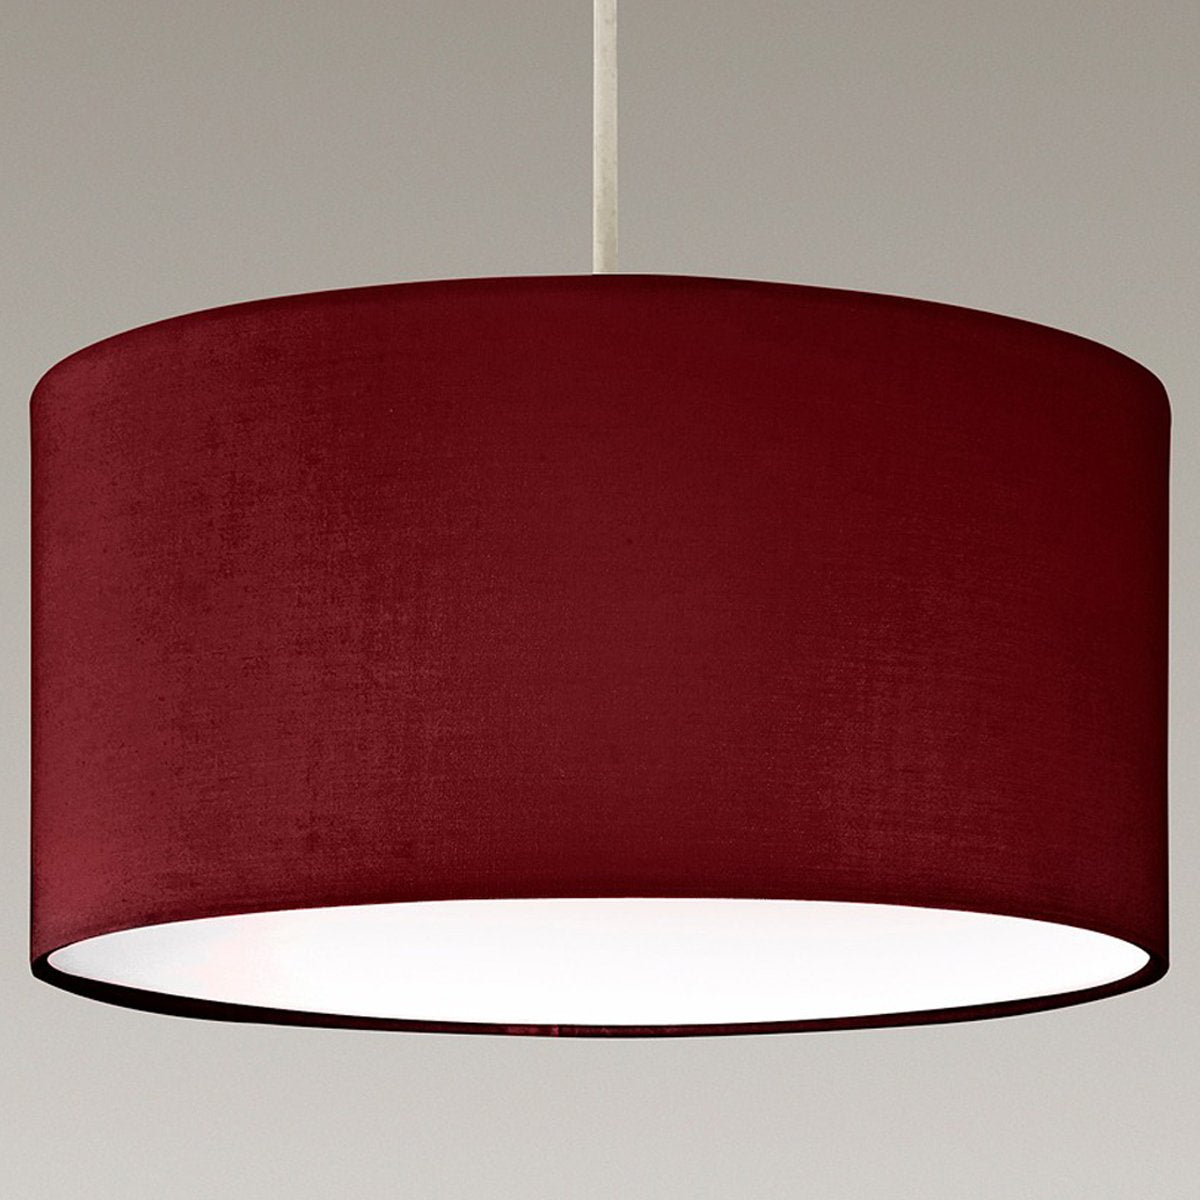 The Lucia is a modern cylinder drum shaped lamp shade in a luxury cotton finish and opal diffuser. This fantastic shade can double up as either a ceiling pendant light shade or table lampshade. Easily fits to your standard ceiling light socket - no wiring required